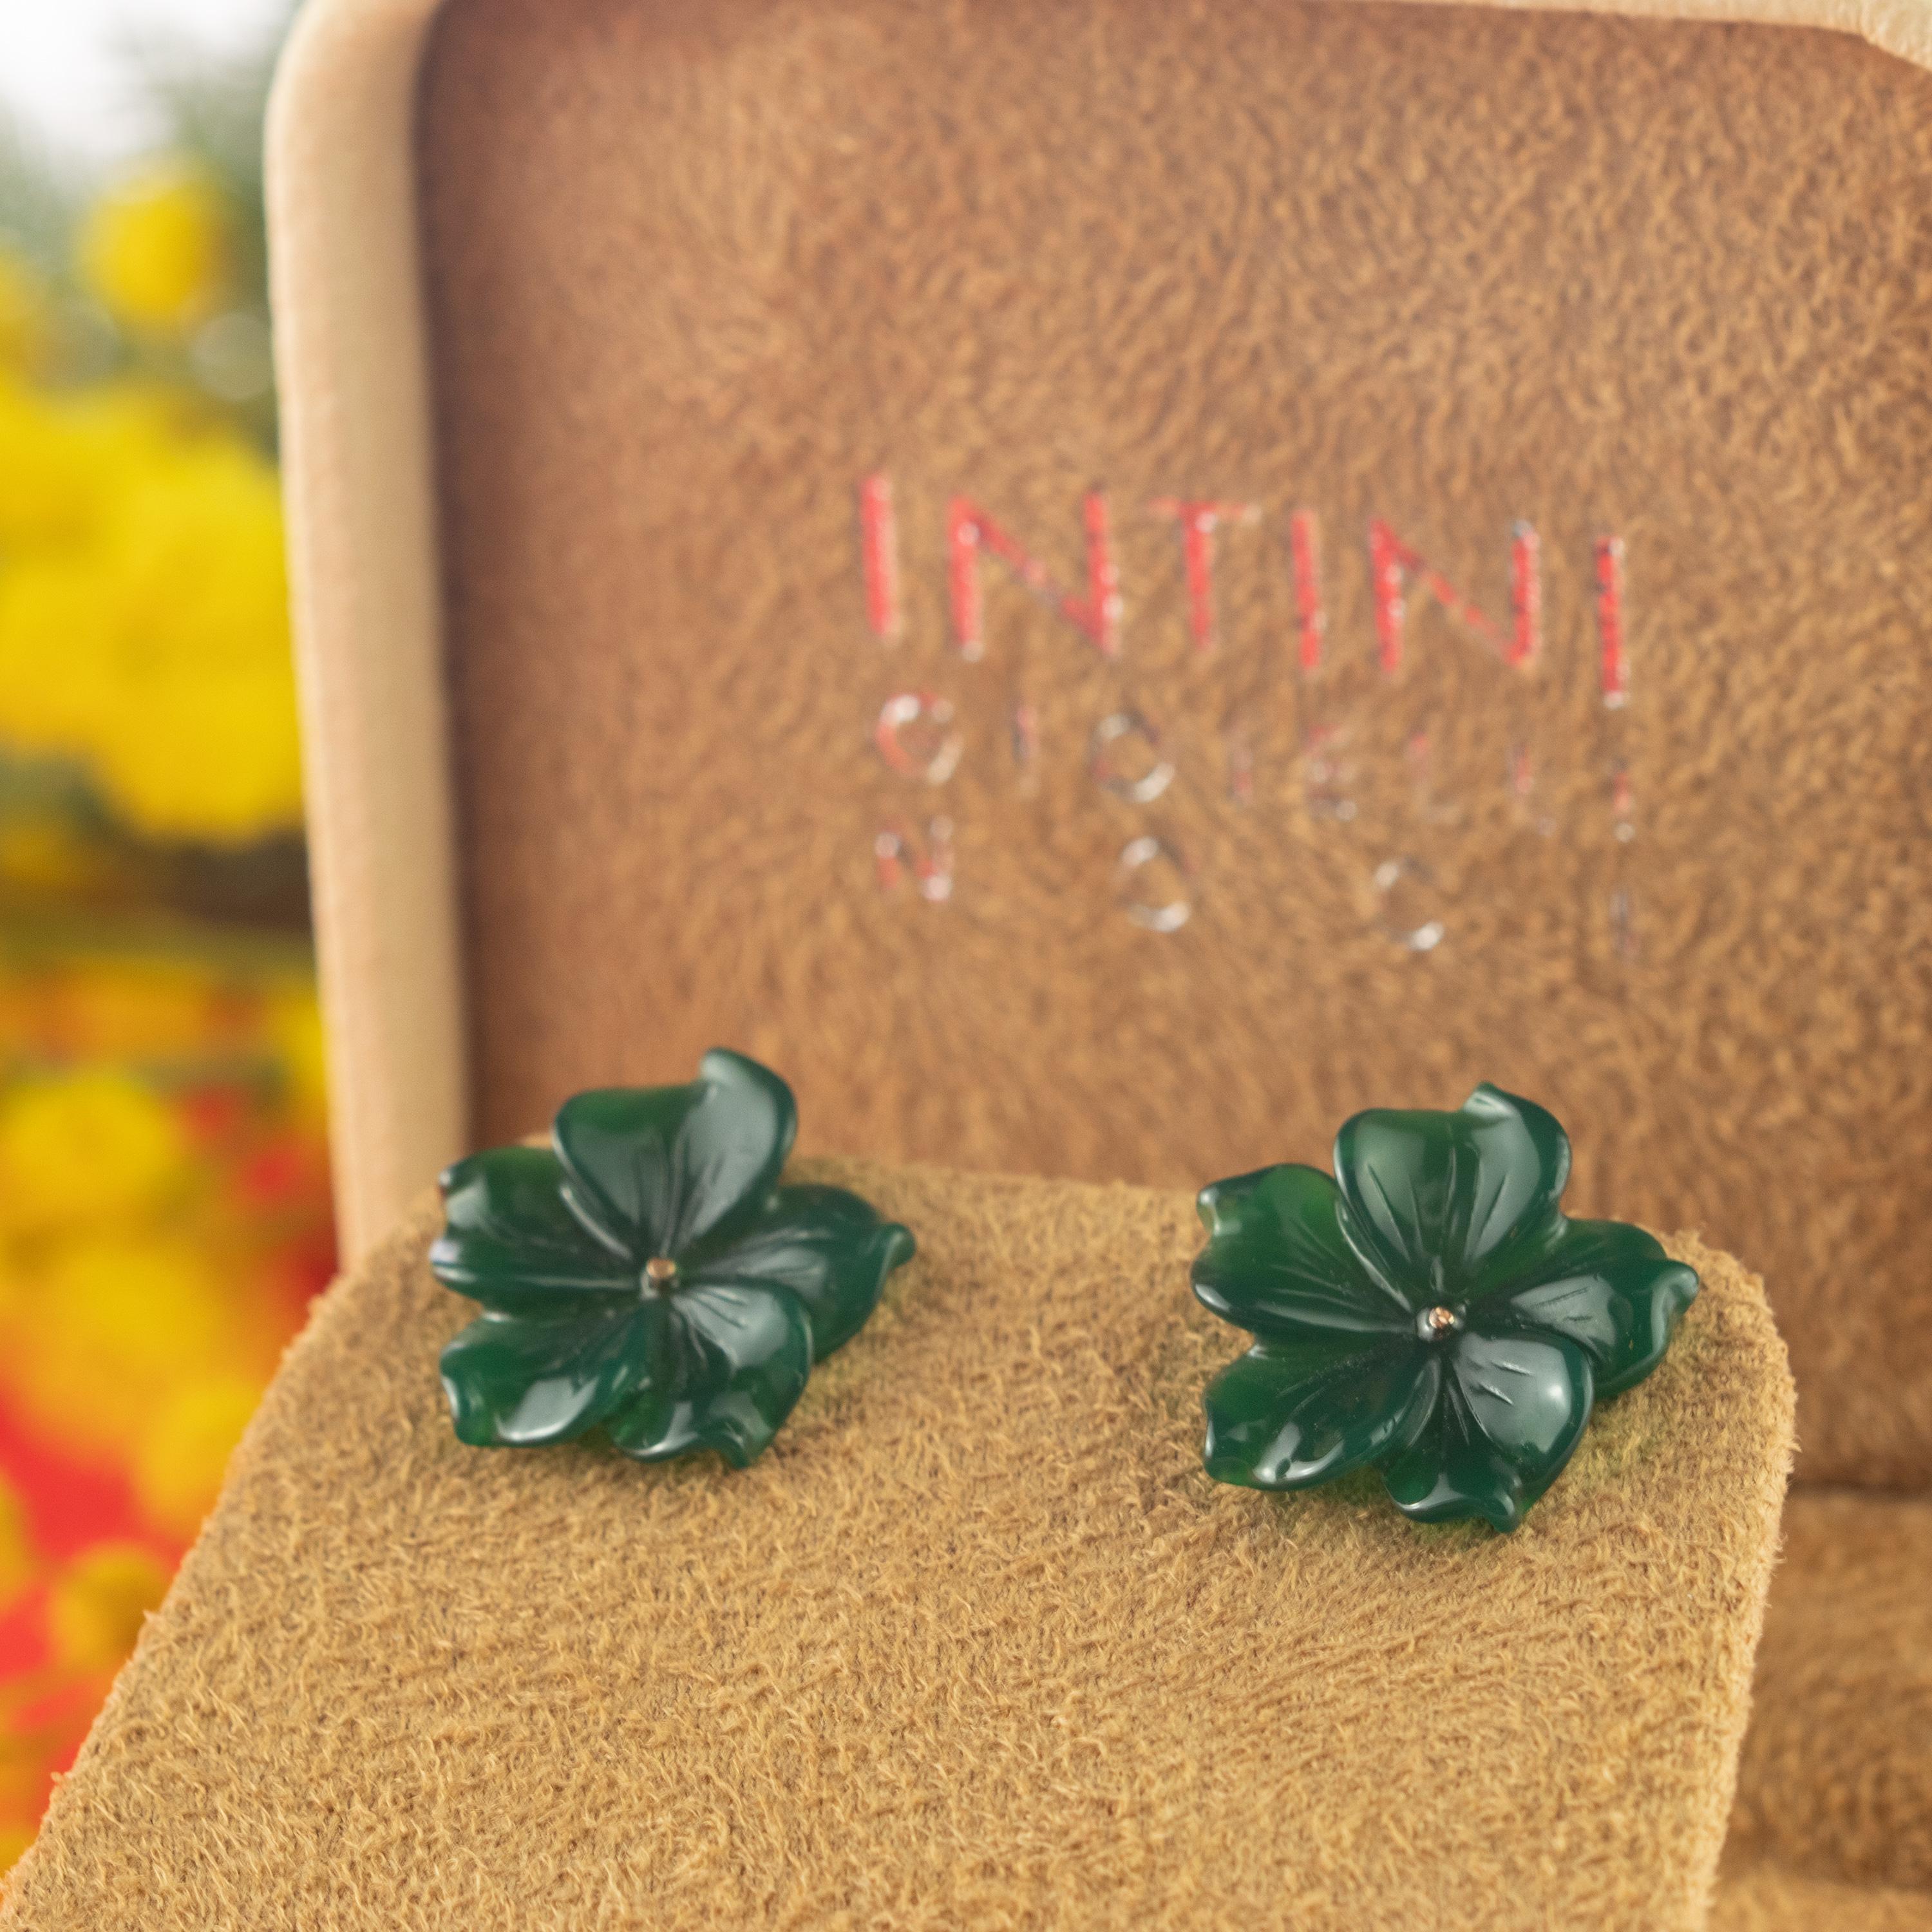 Astonishing and gorgeous green agate flower stud earrings. Natural carved petals that evoke the italian handmade traditional jewelry work.

This delicate design shows the sweetness and innocence of the jewelry. It takes us to those first jewels